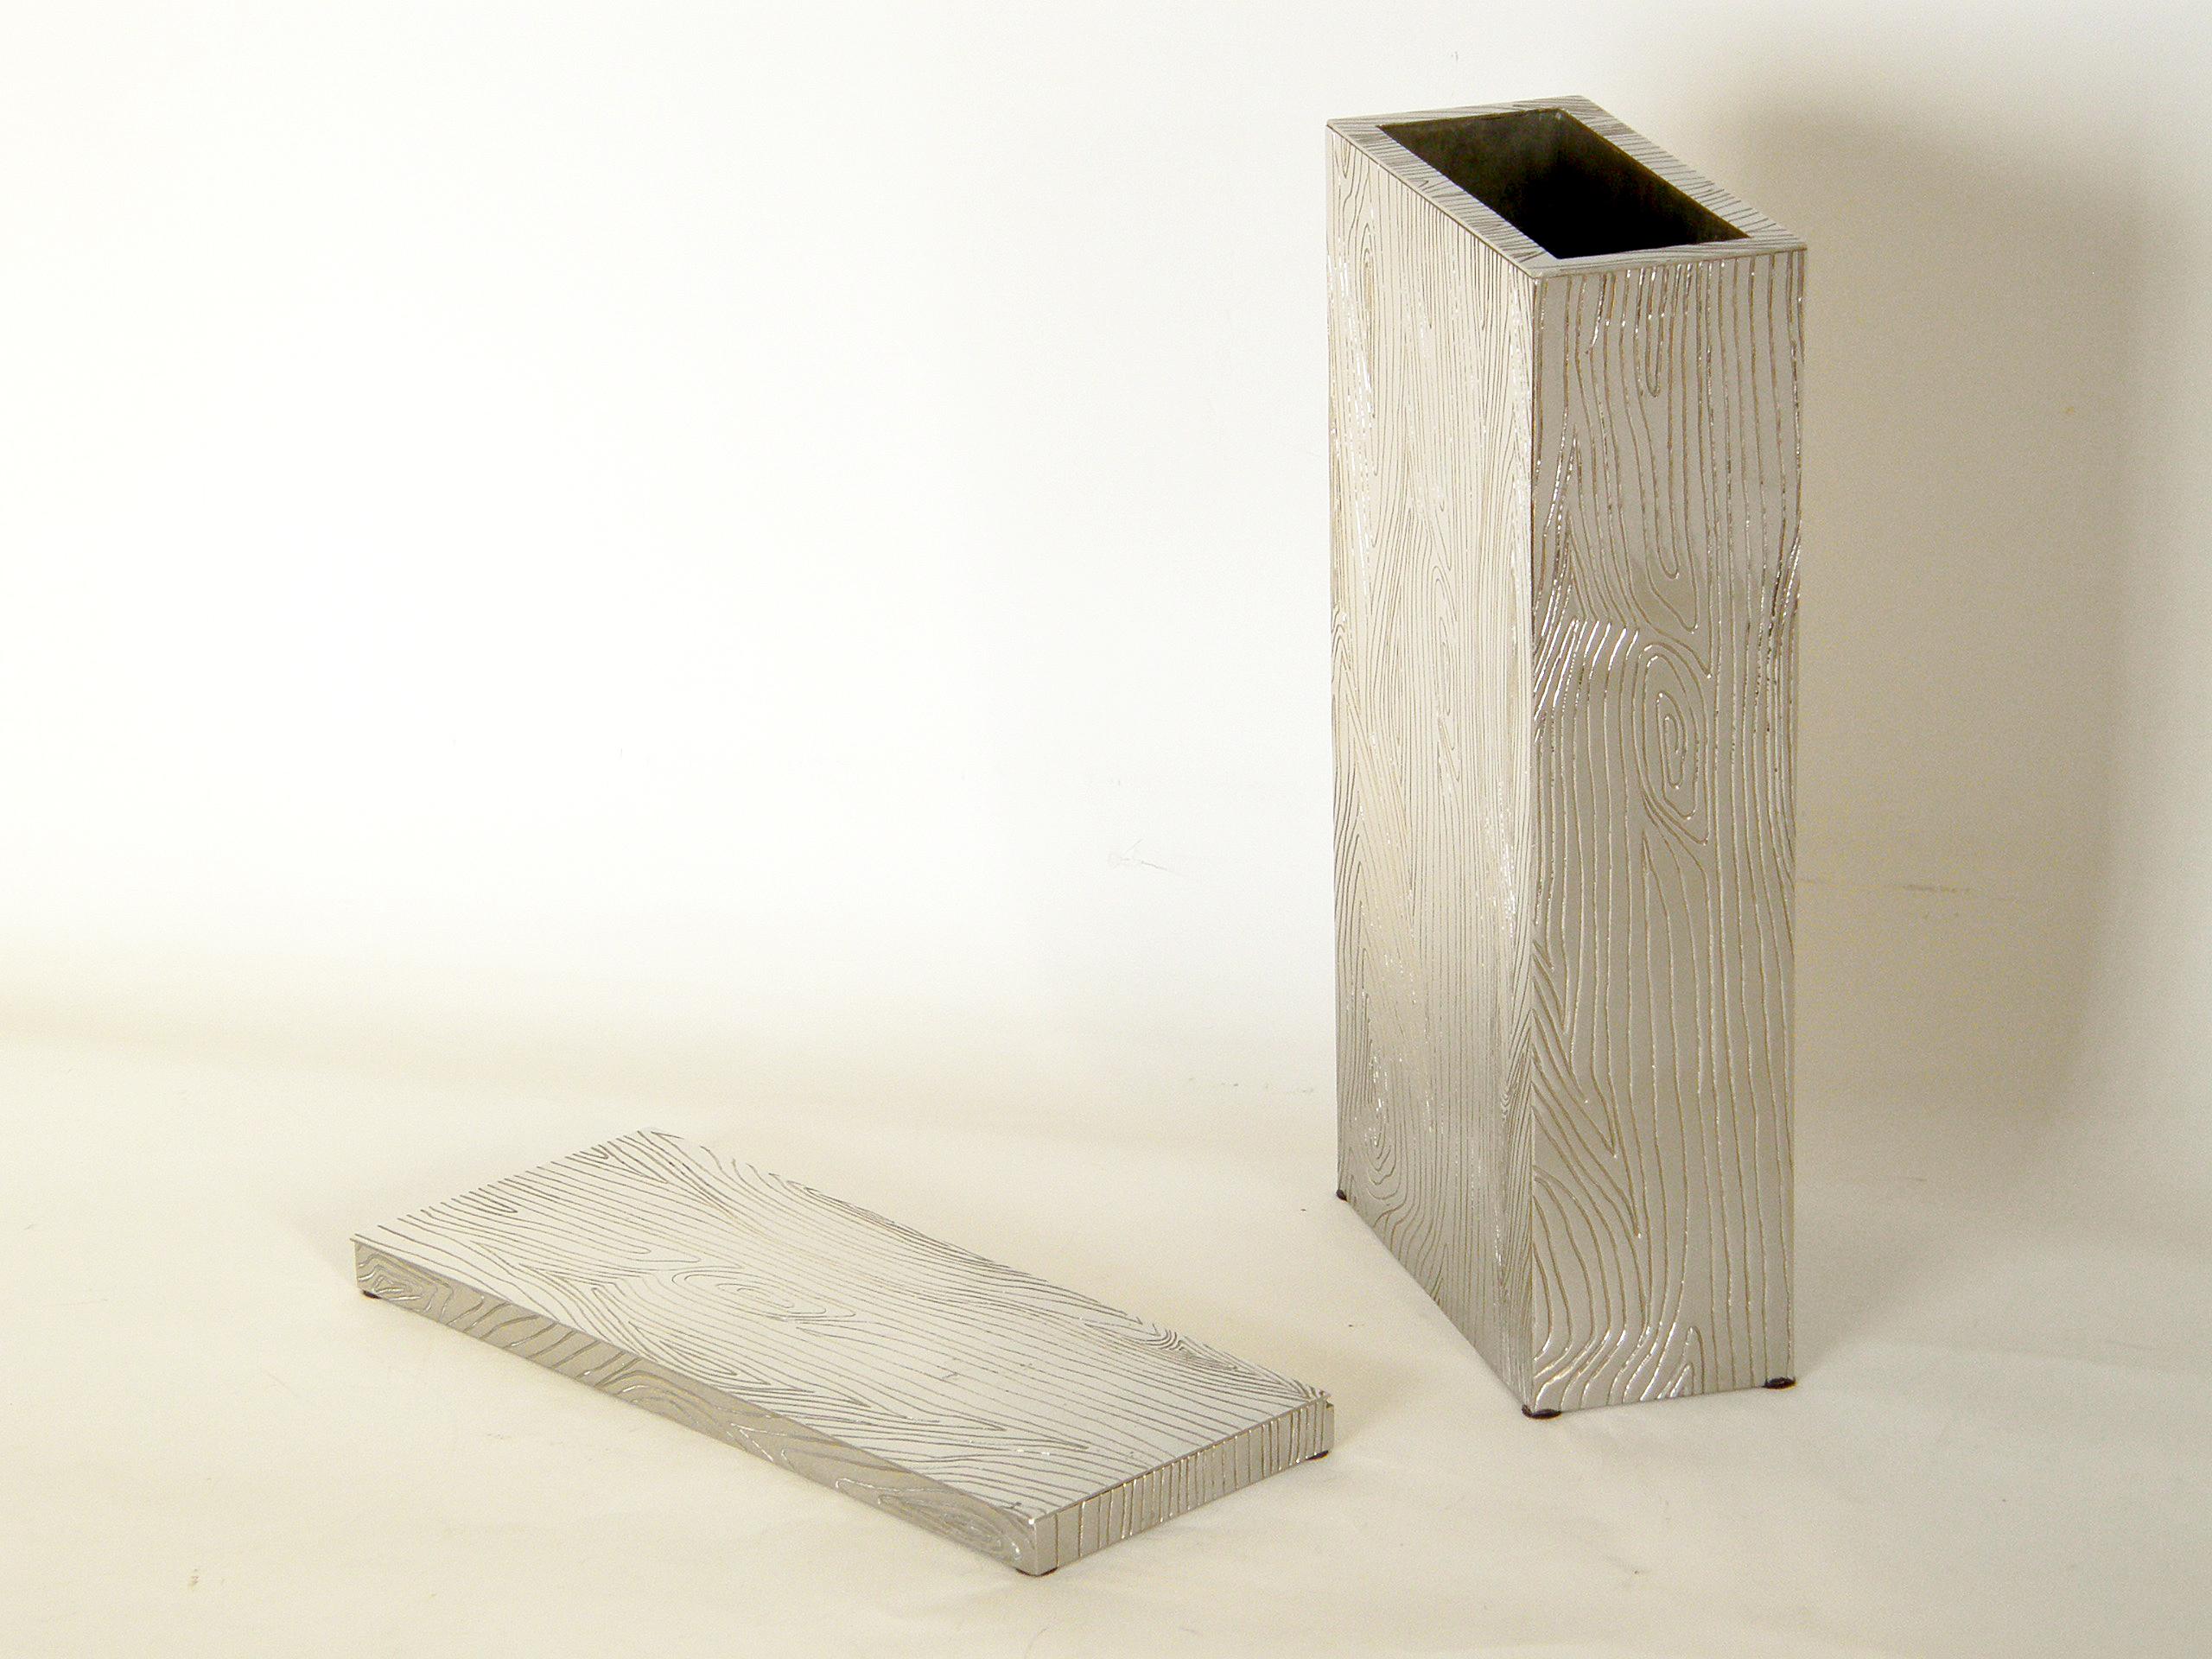 This unusual metal vase and matching box have an impressed faux bois pattern. The shallow box has an attached, hinged lid. They both are rectangular in shape, and the use of metal and the highly polished finish are well suited to their crisp,